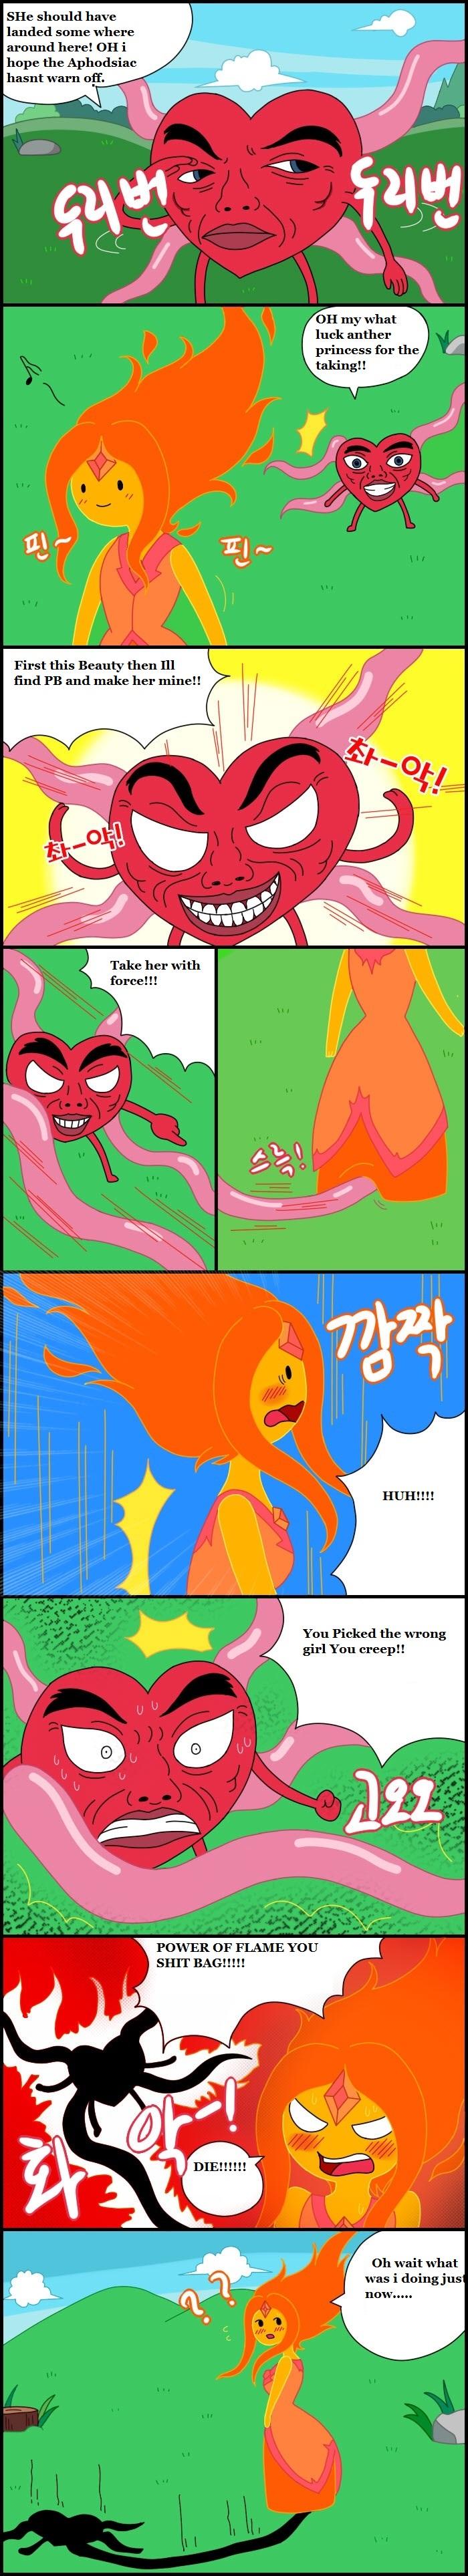 Ametuer Porn Adult Time 2 - Adventure time Free Fucking - Page 10